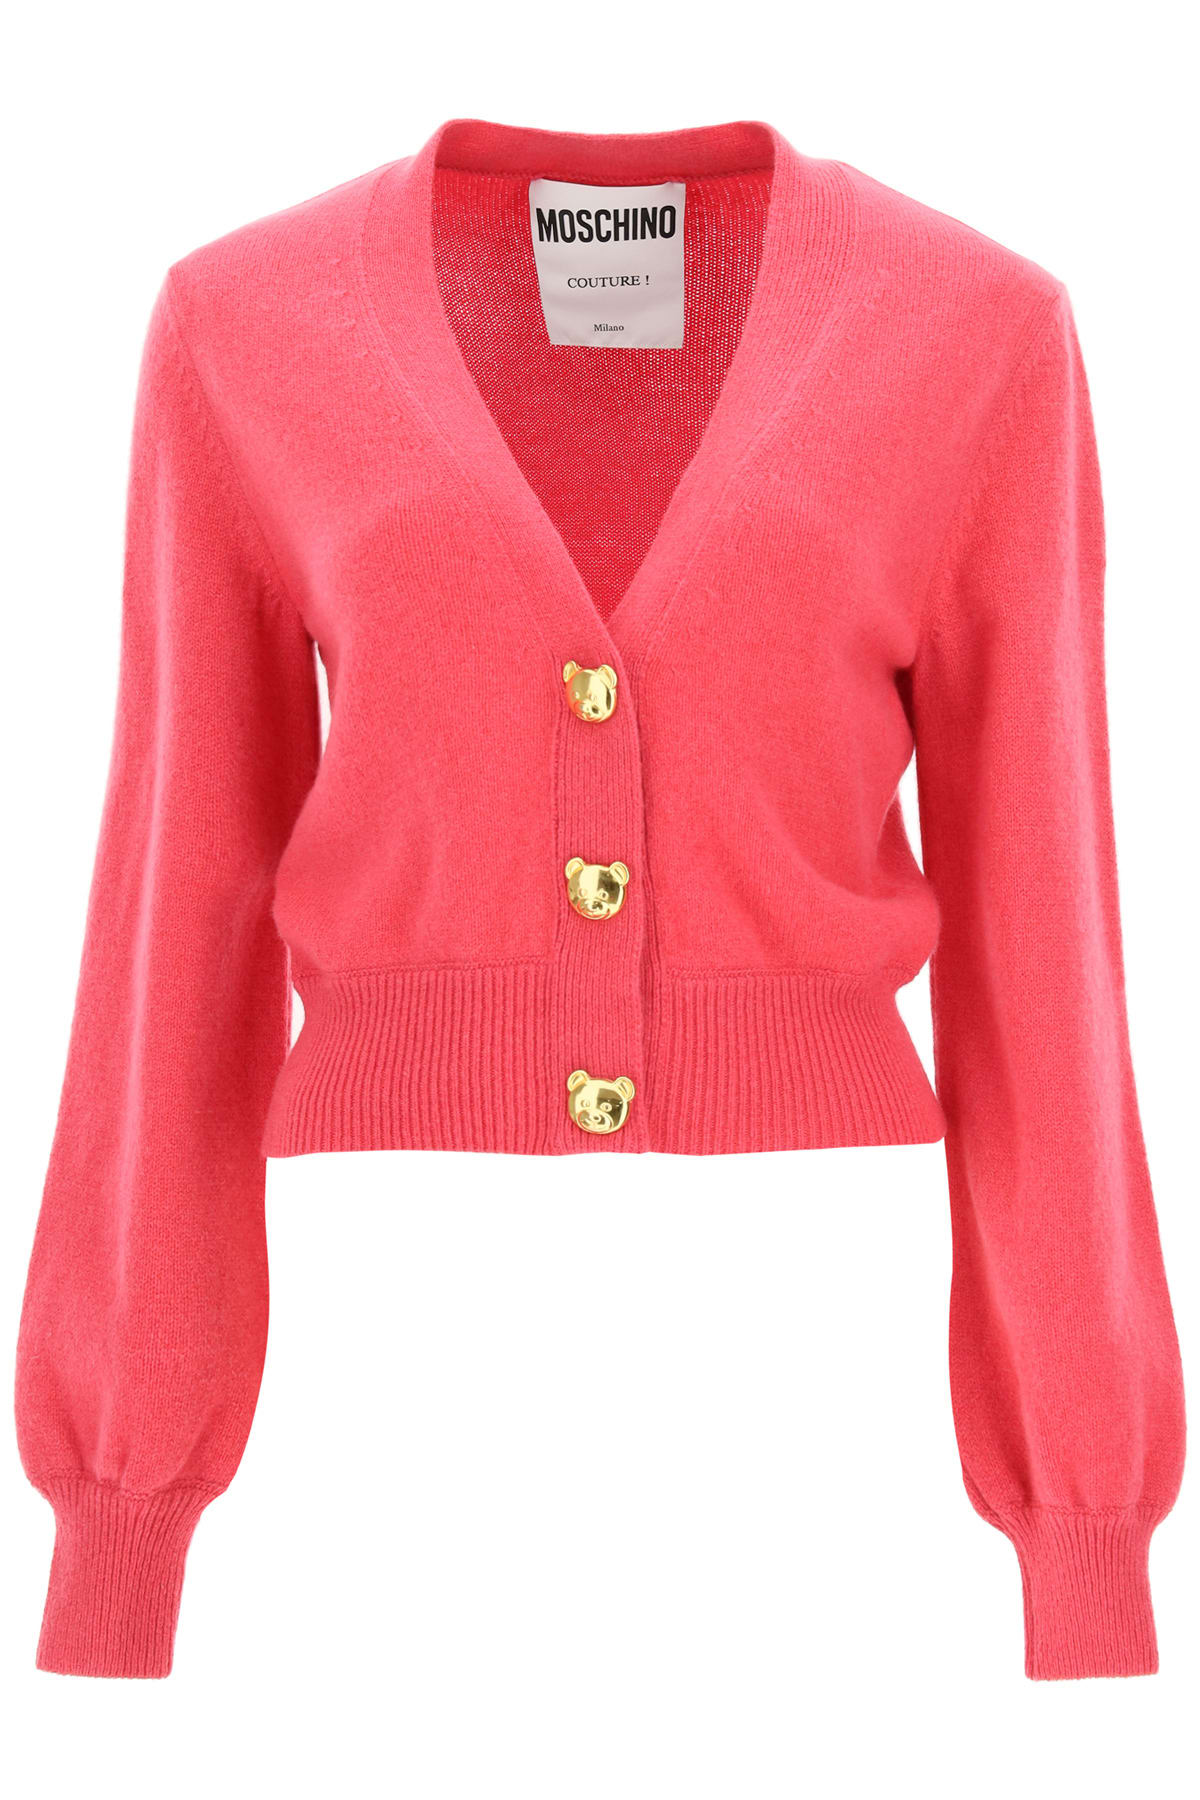 Moschino Cardigan With Teddy Bear Buttons